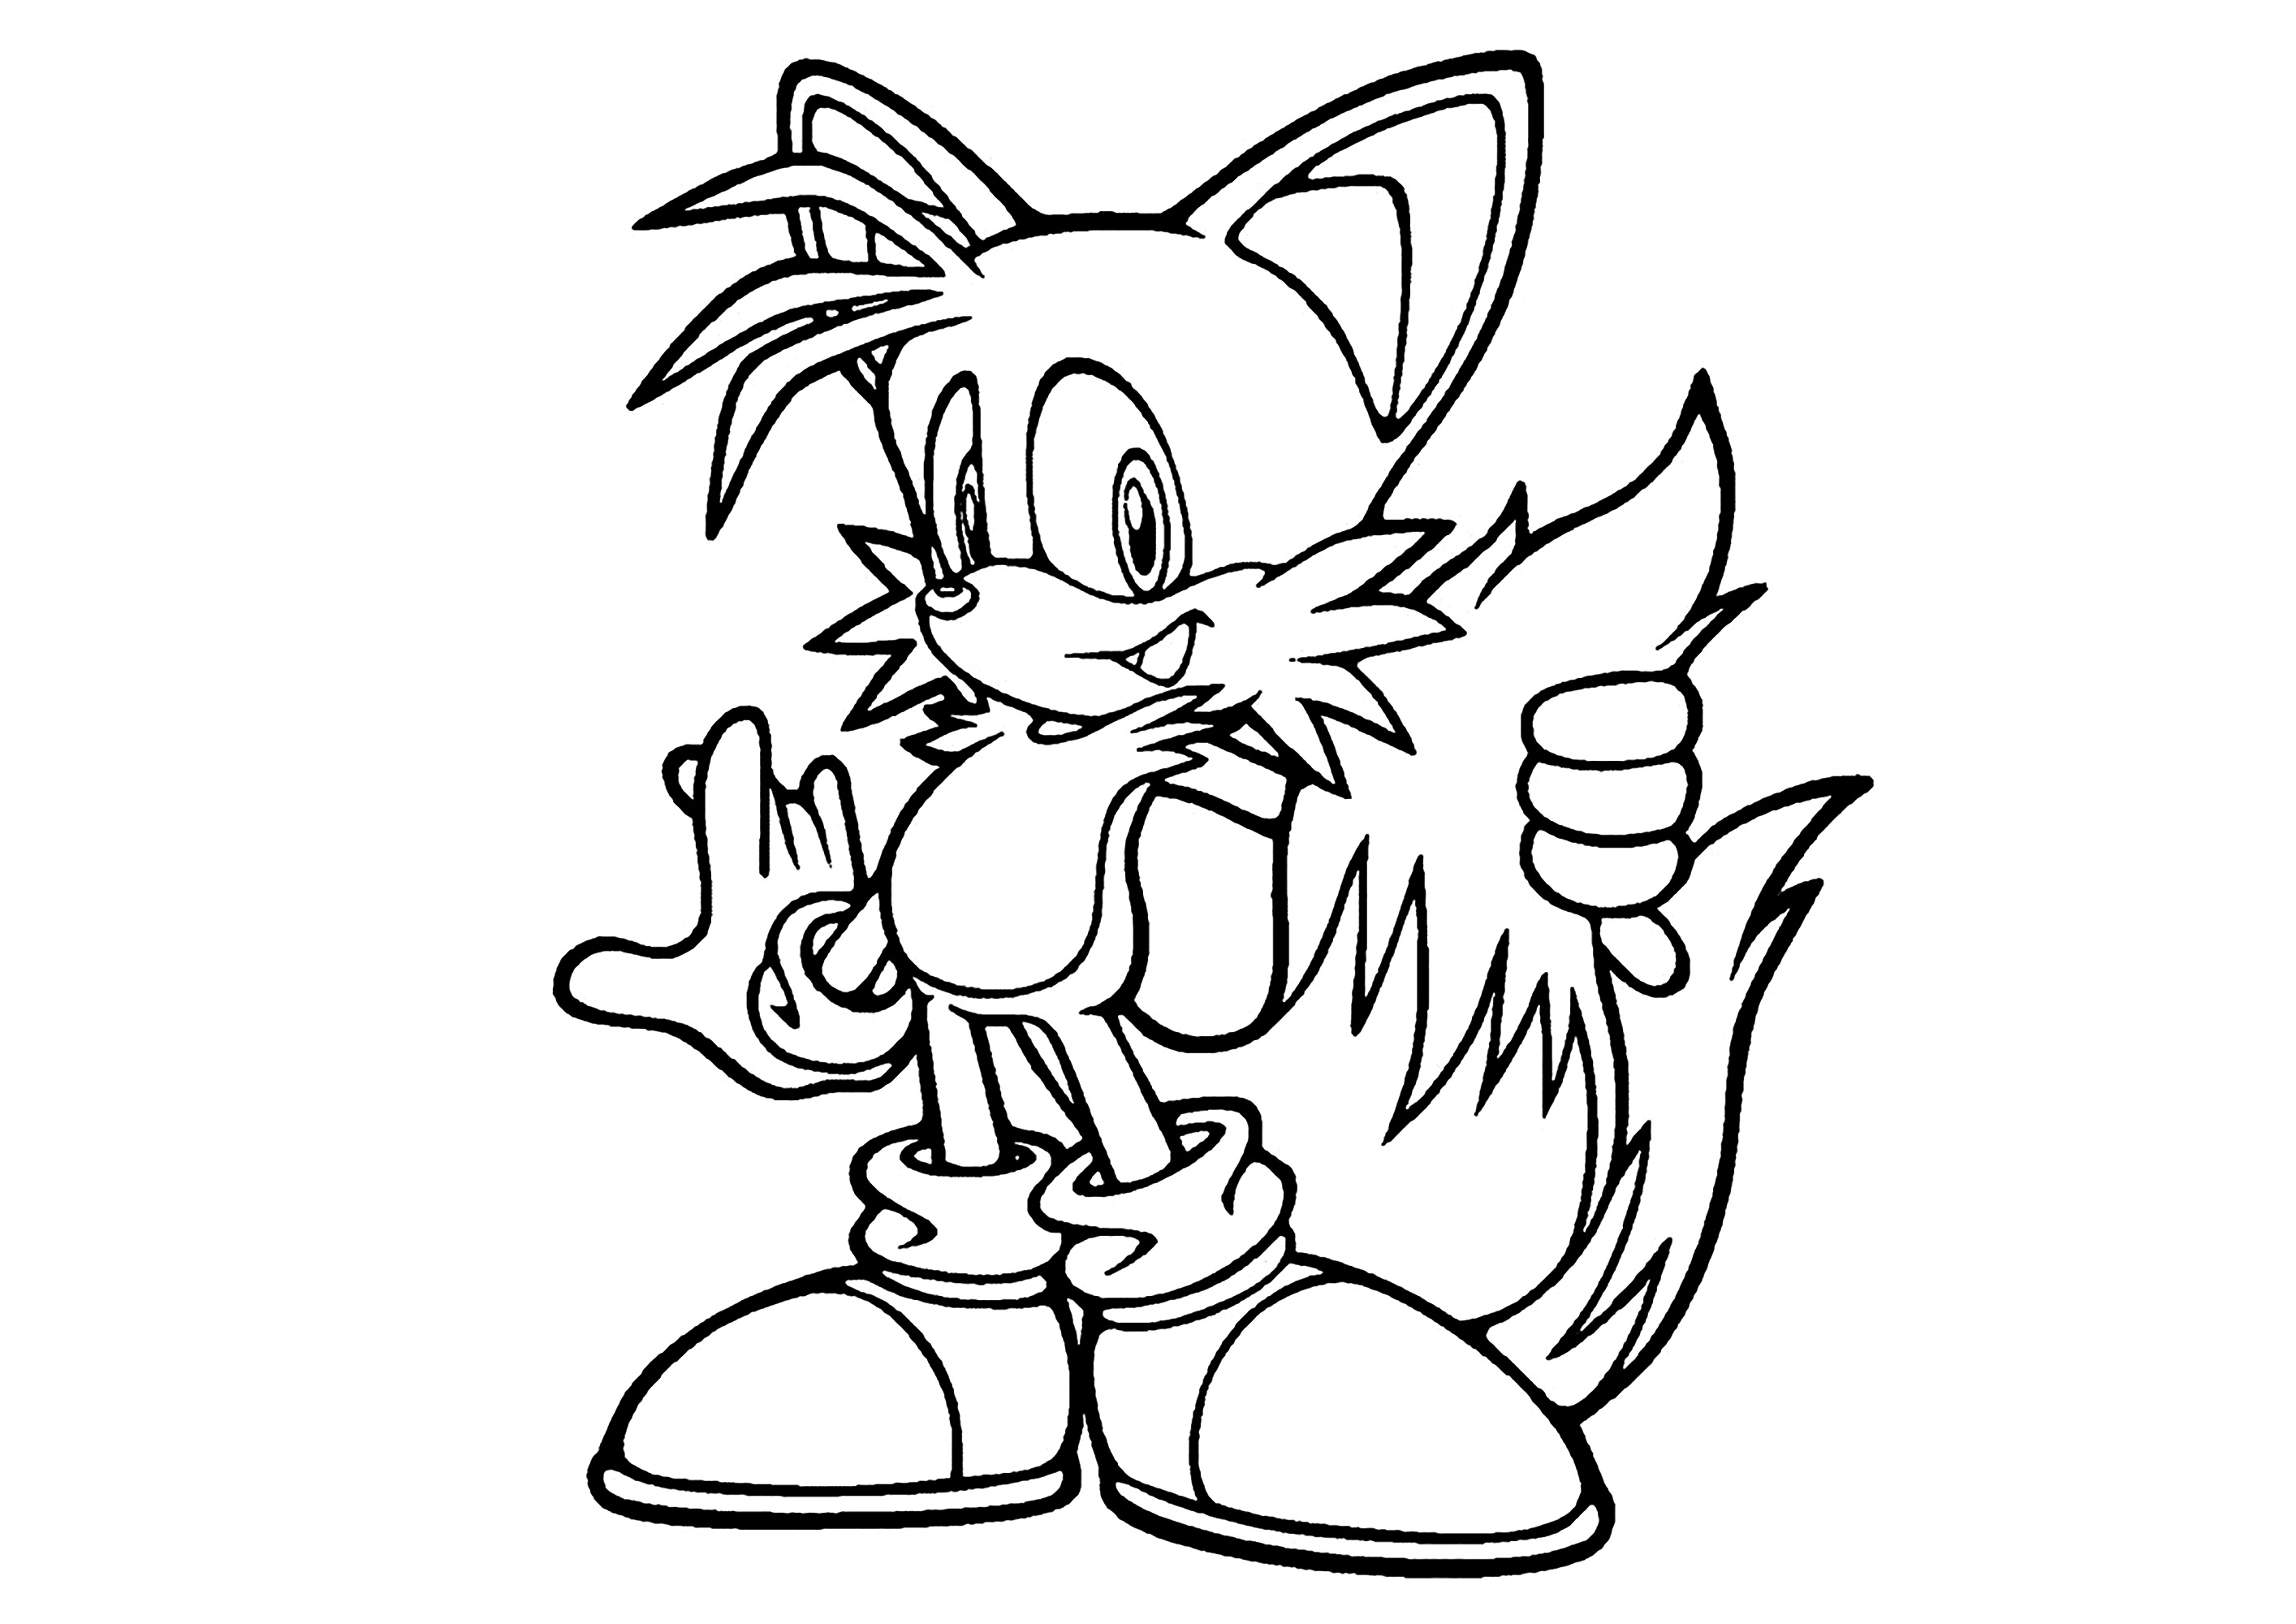 Simple coloring of tails sonics fox friend